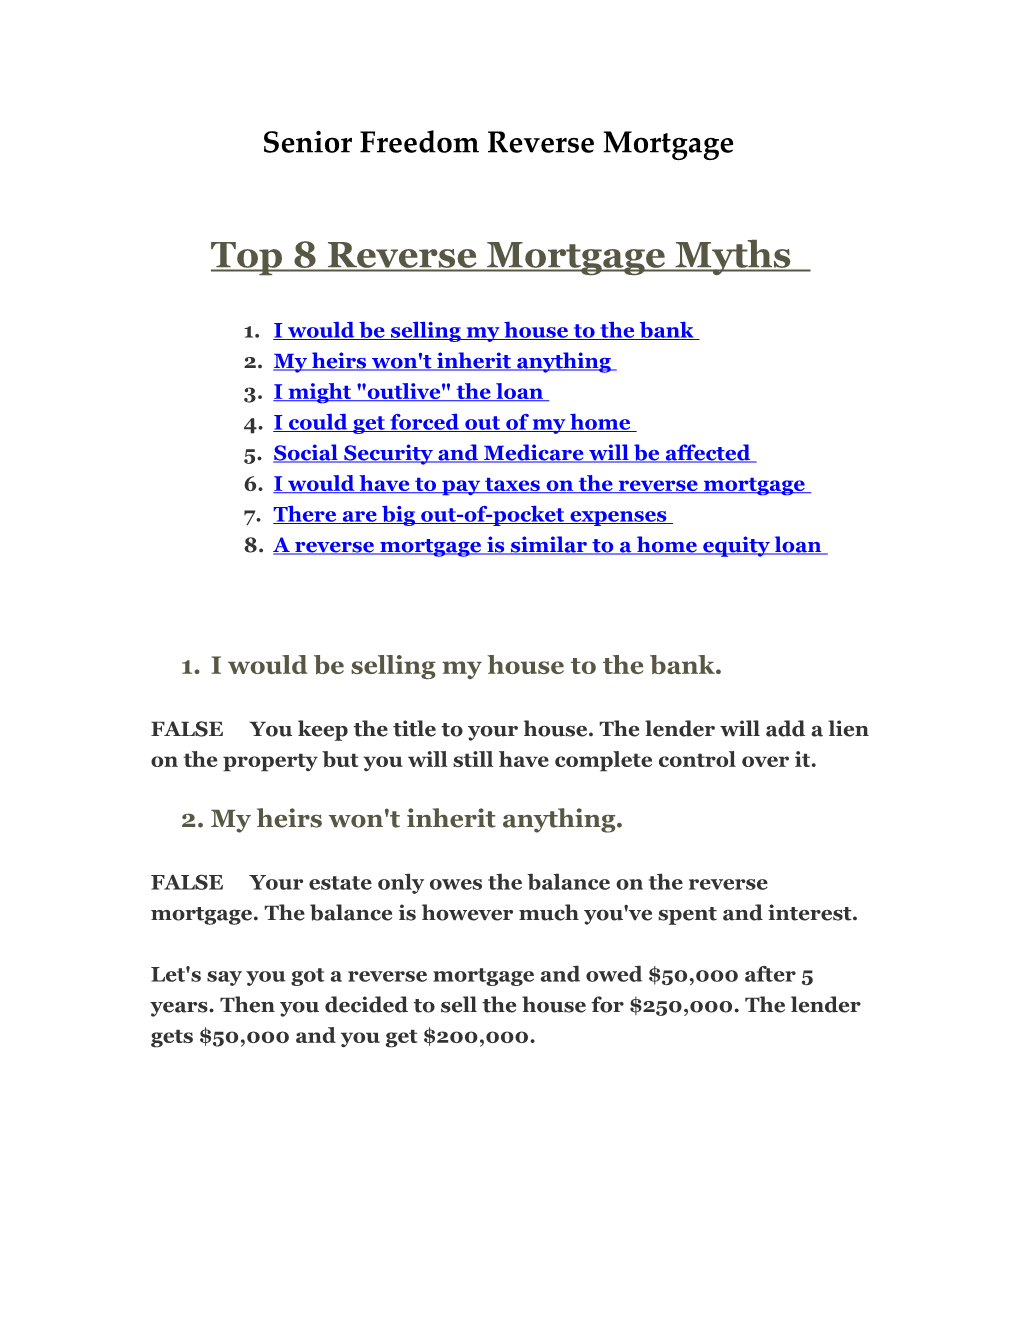 Top 8 Reverse Mortgage Myths